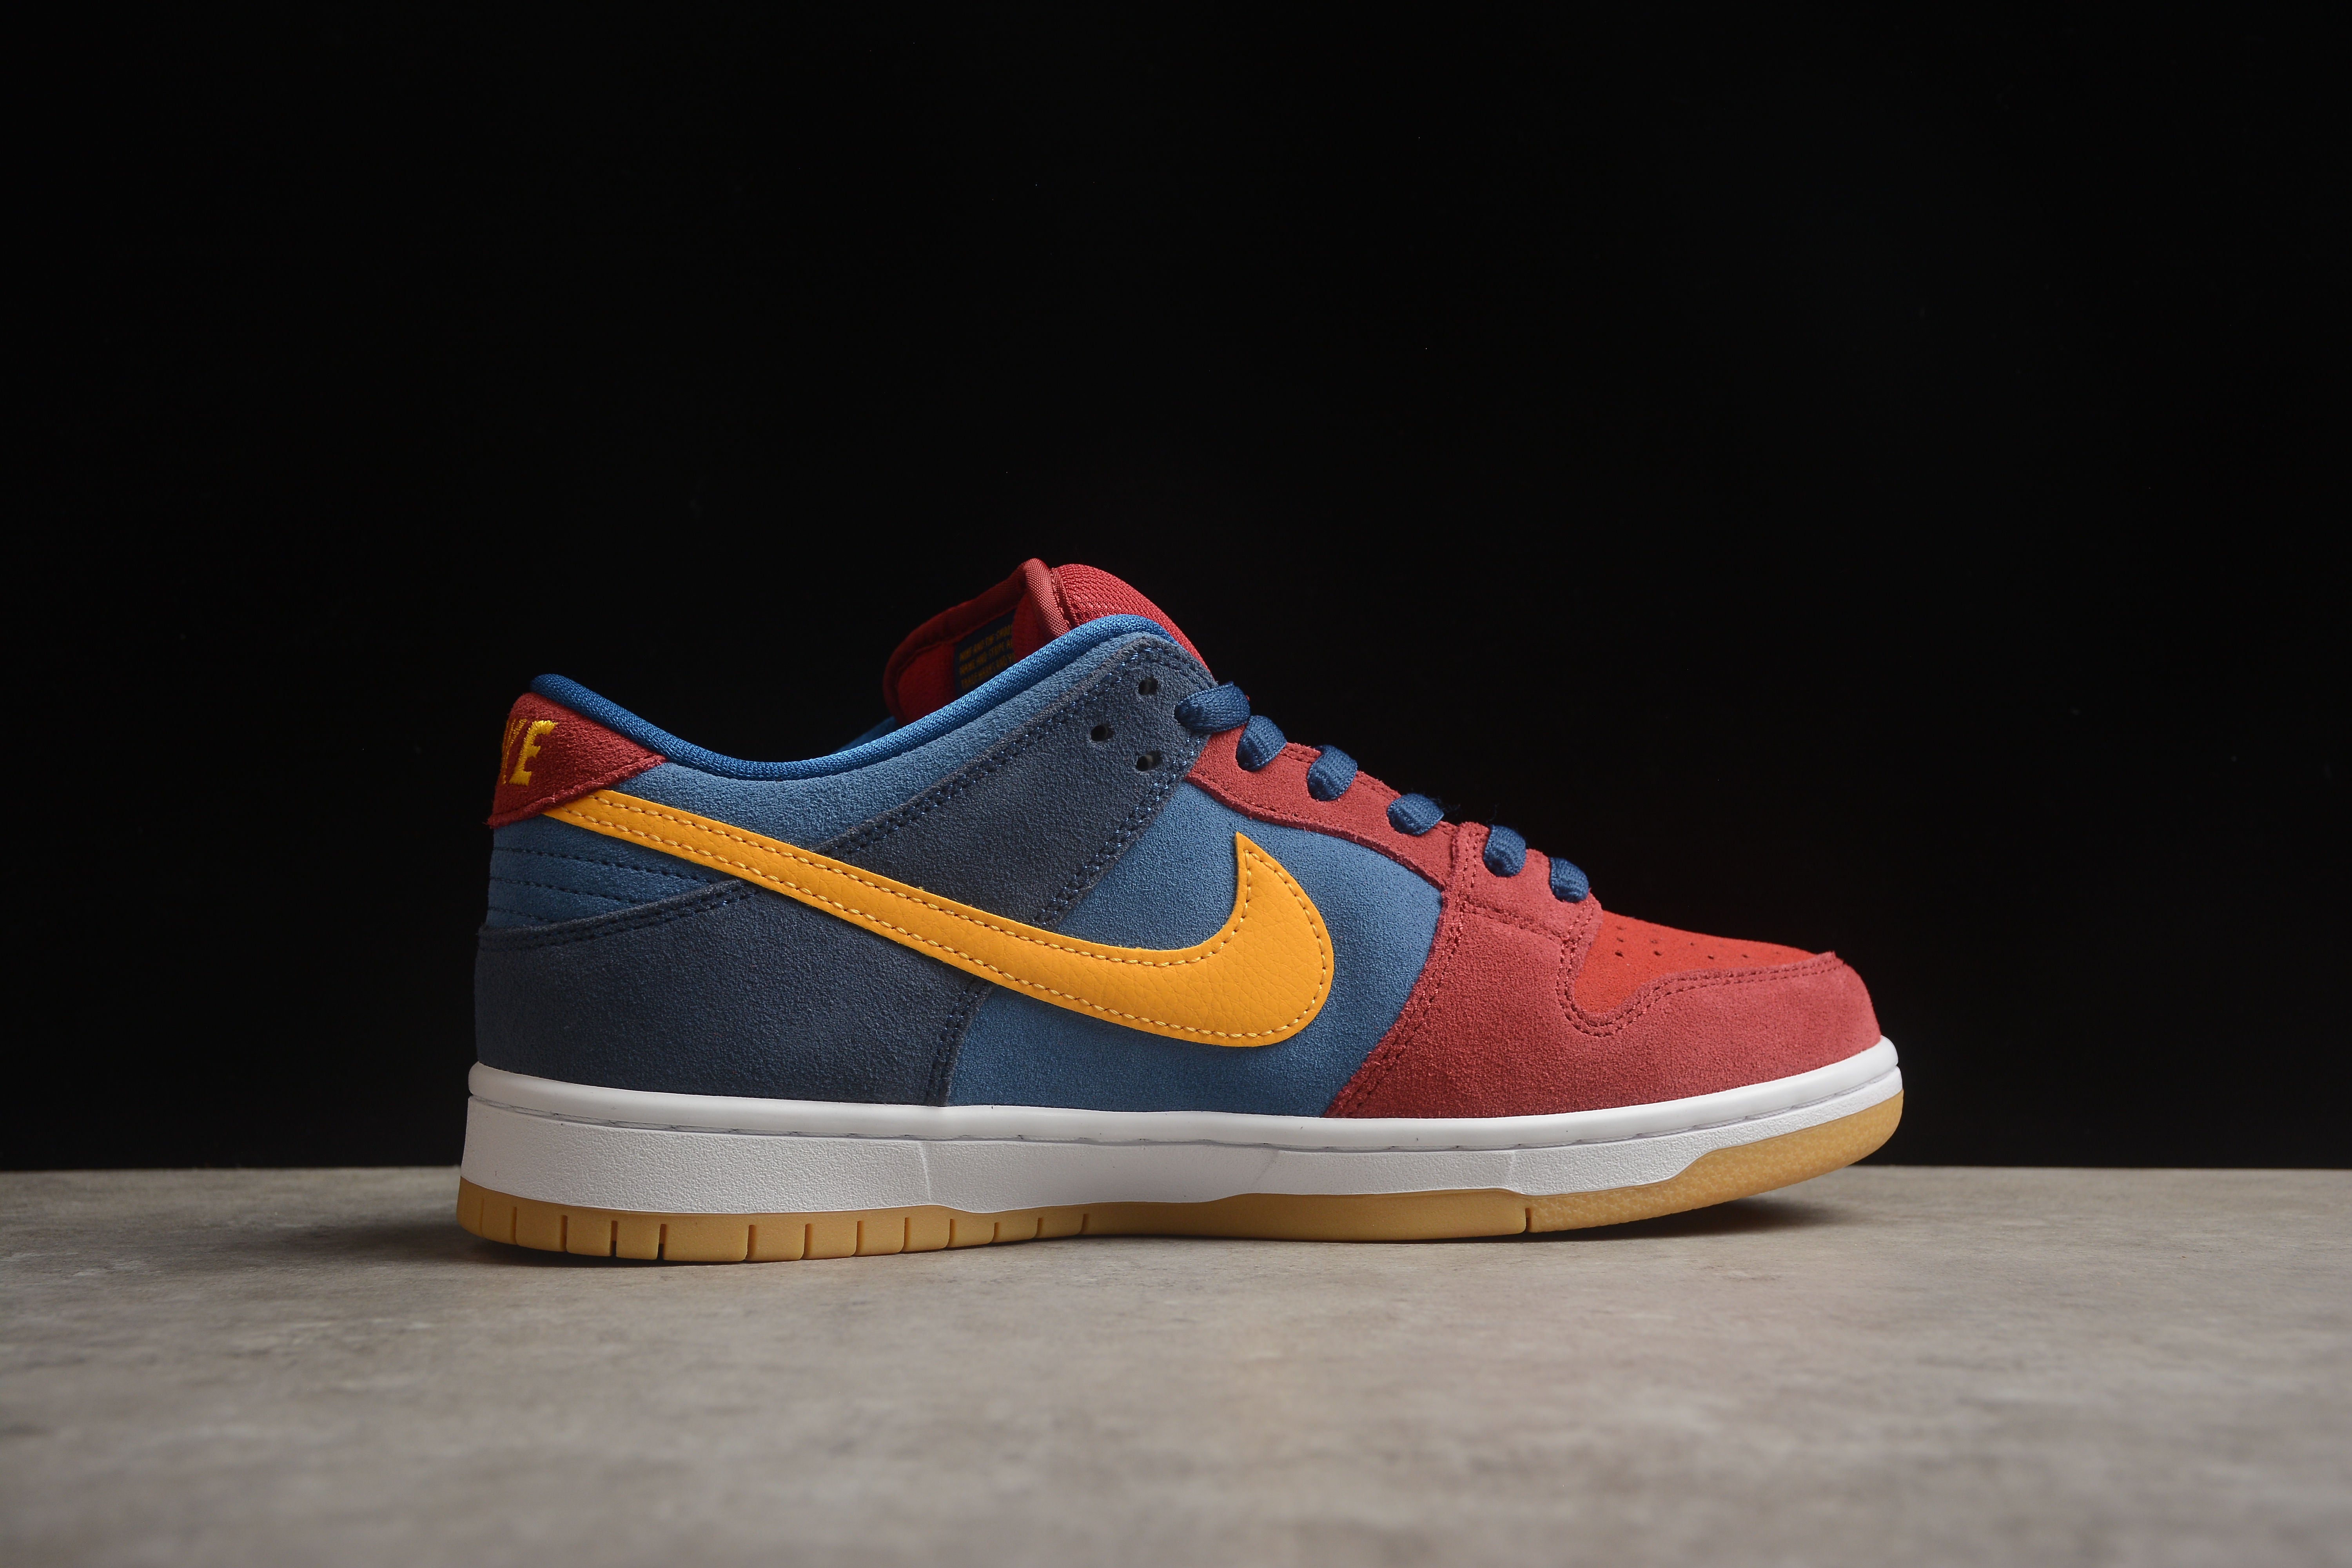 Nike SB dunk low red and blue mandarin shoes